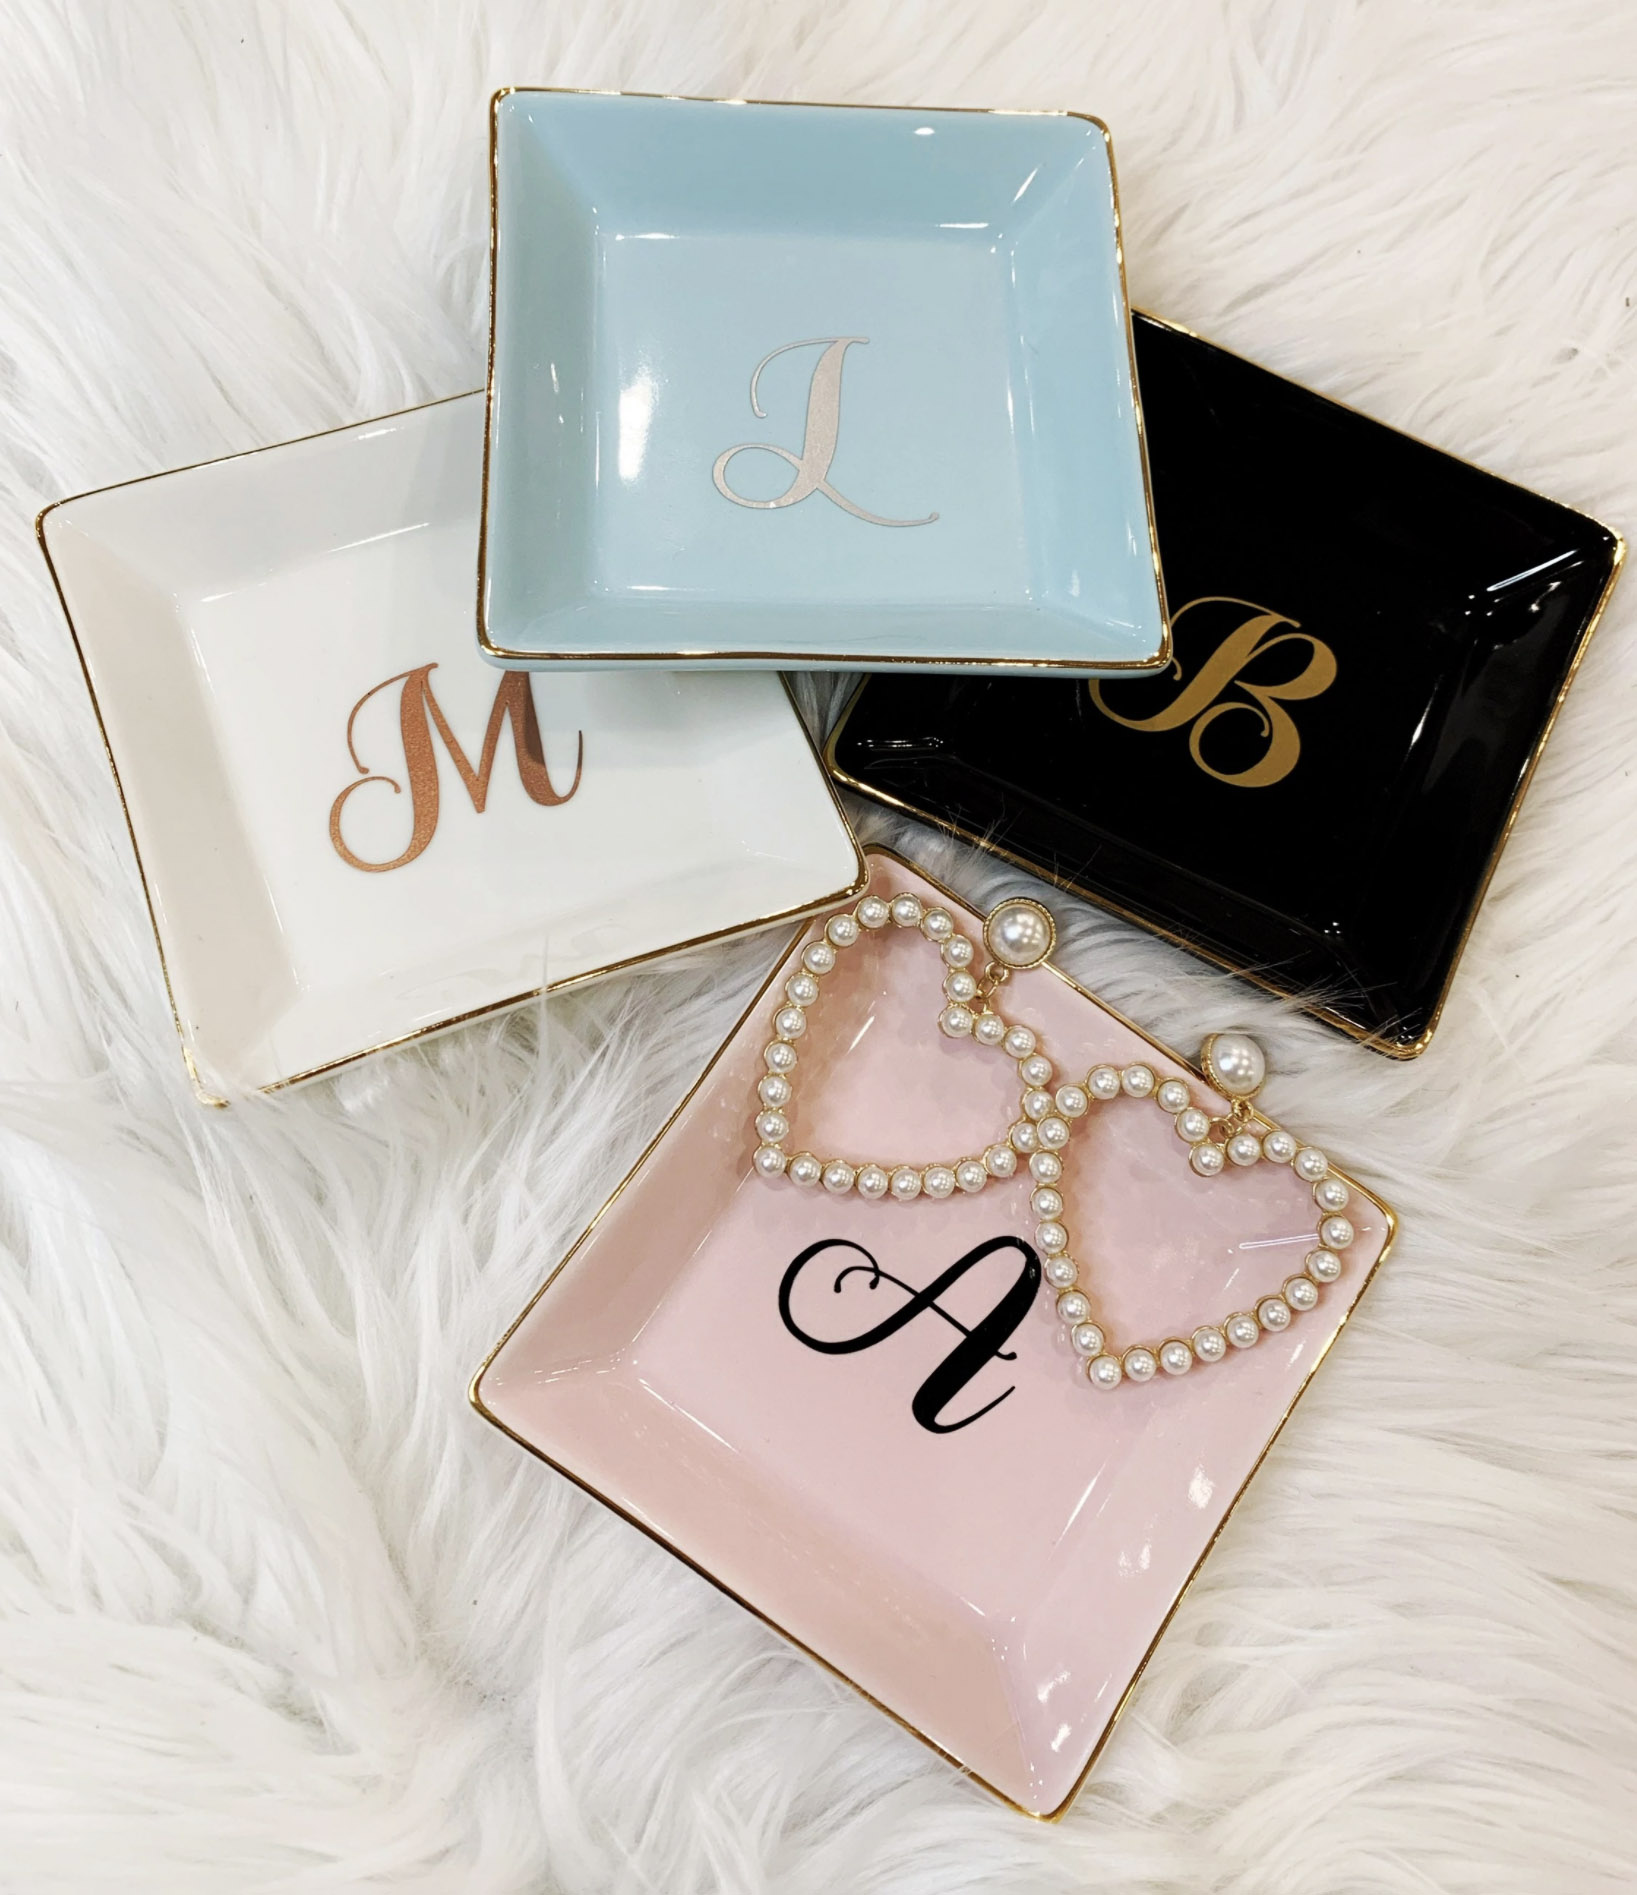 6 Personalized Name and Initial Notepad Sets bridesmaids gifts wedding bride